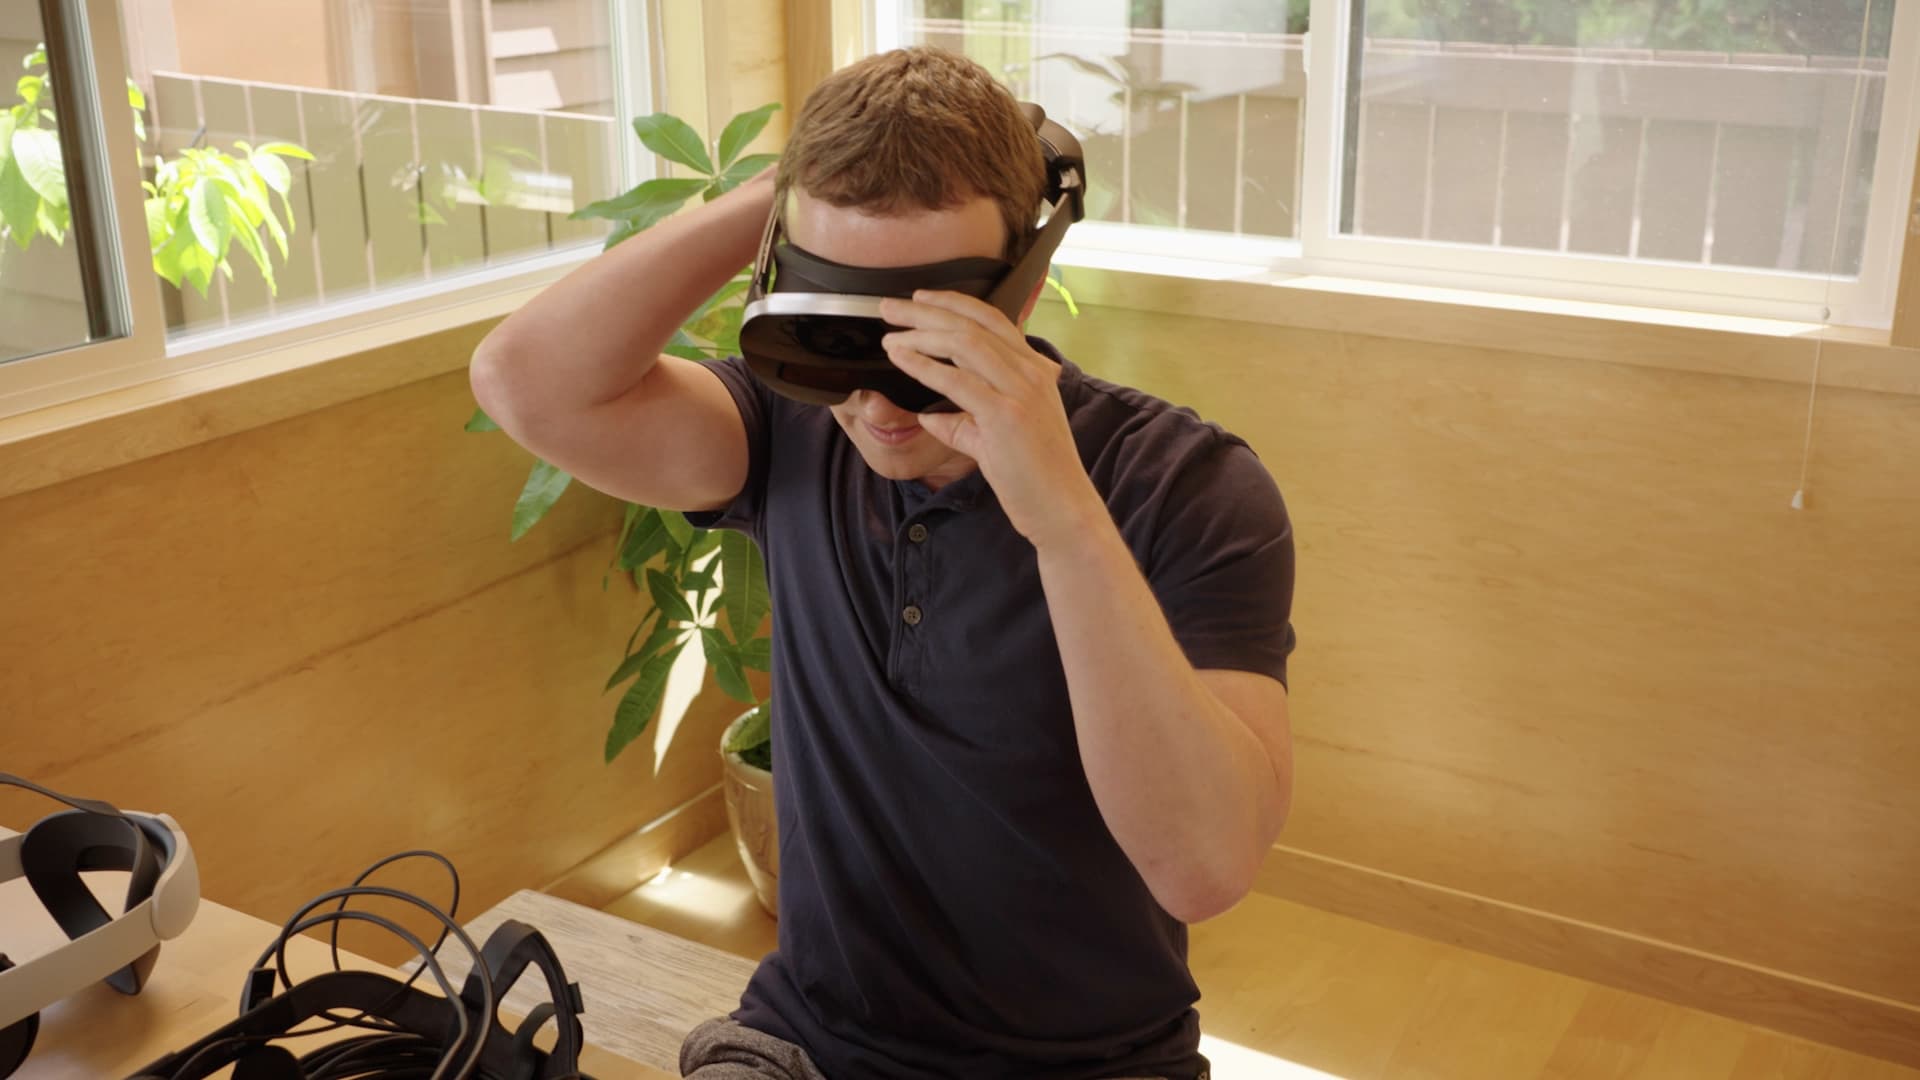 Mark Zuckerberg showed these prototype headsets to build support for his $10 billion metaverse bet – CNBC